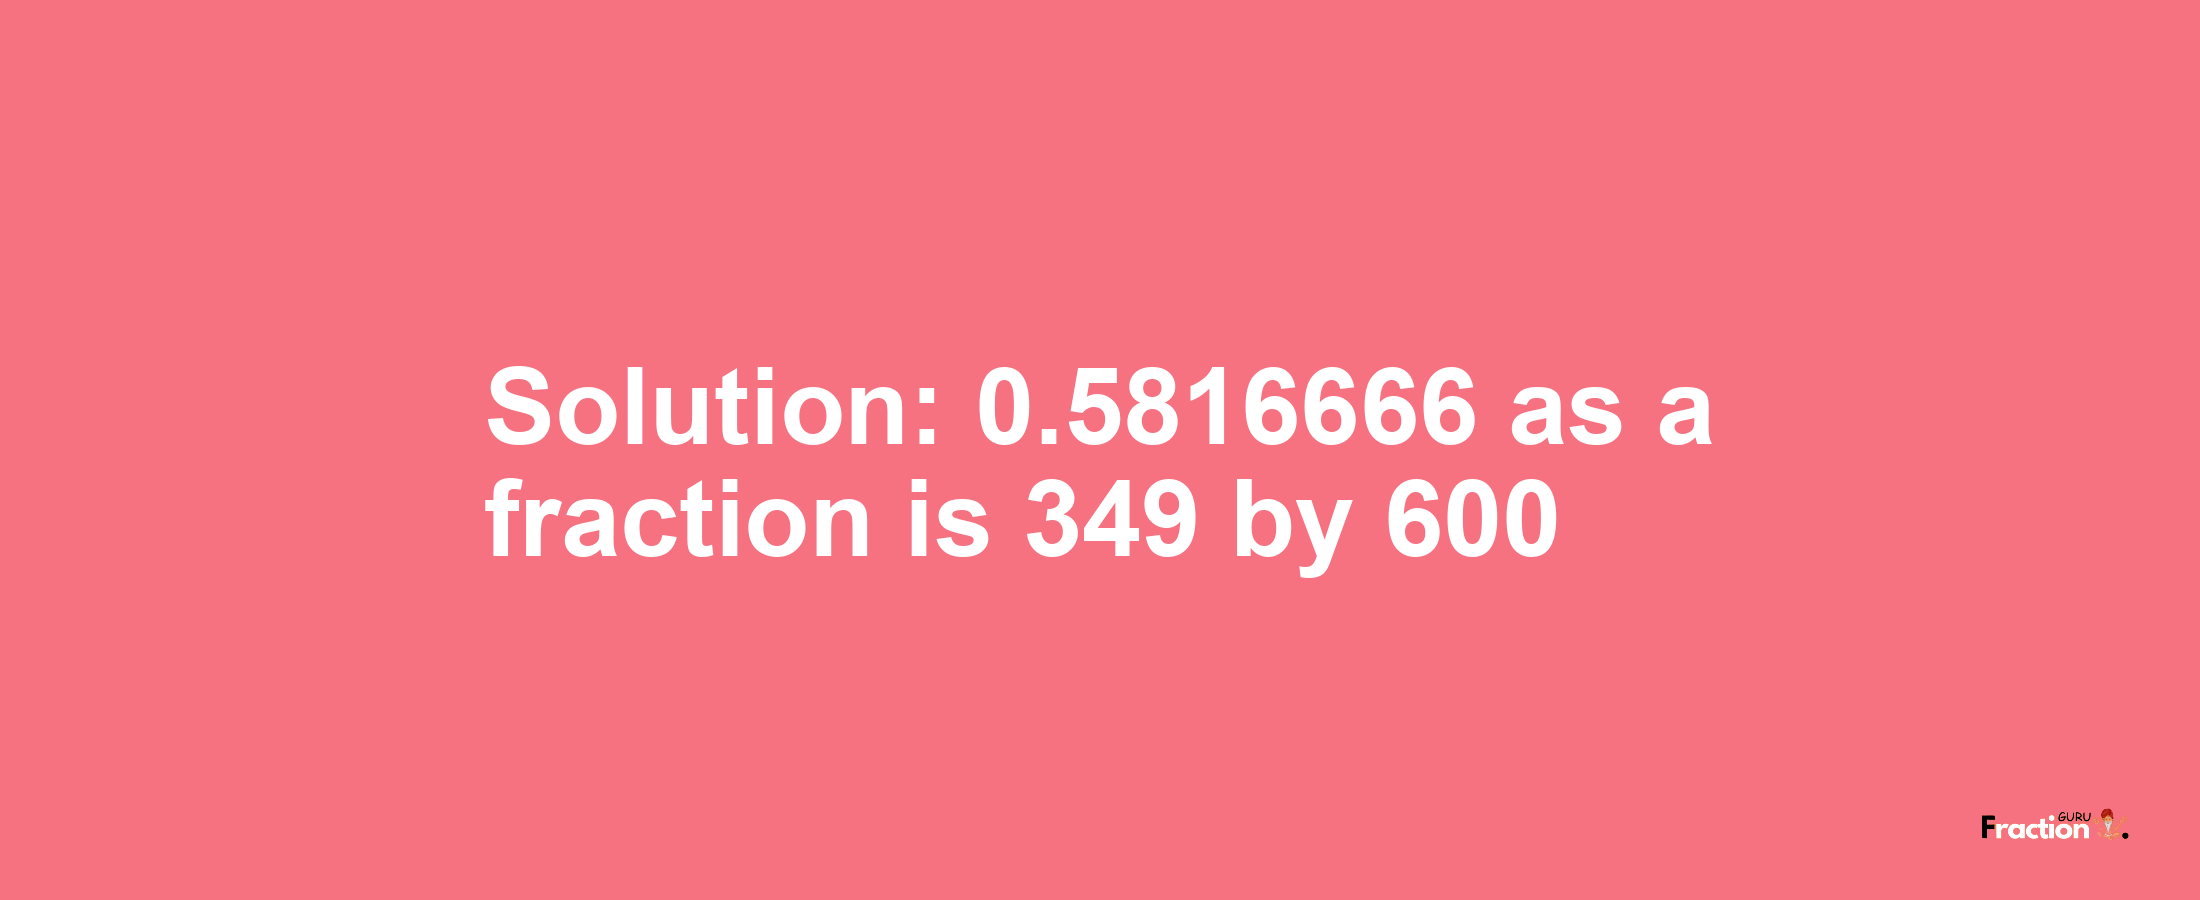 Solution:0.5816666 as a fraction is 349/600